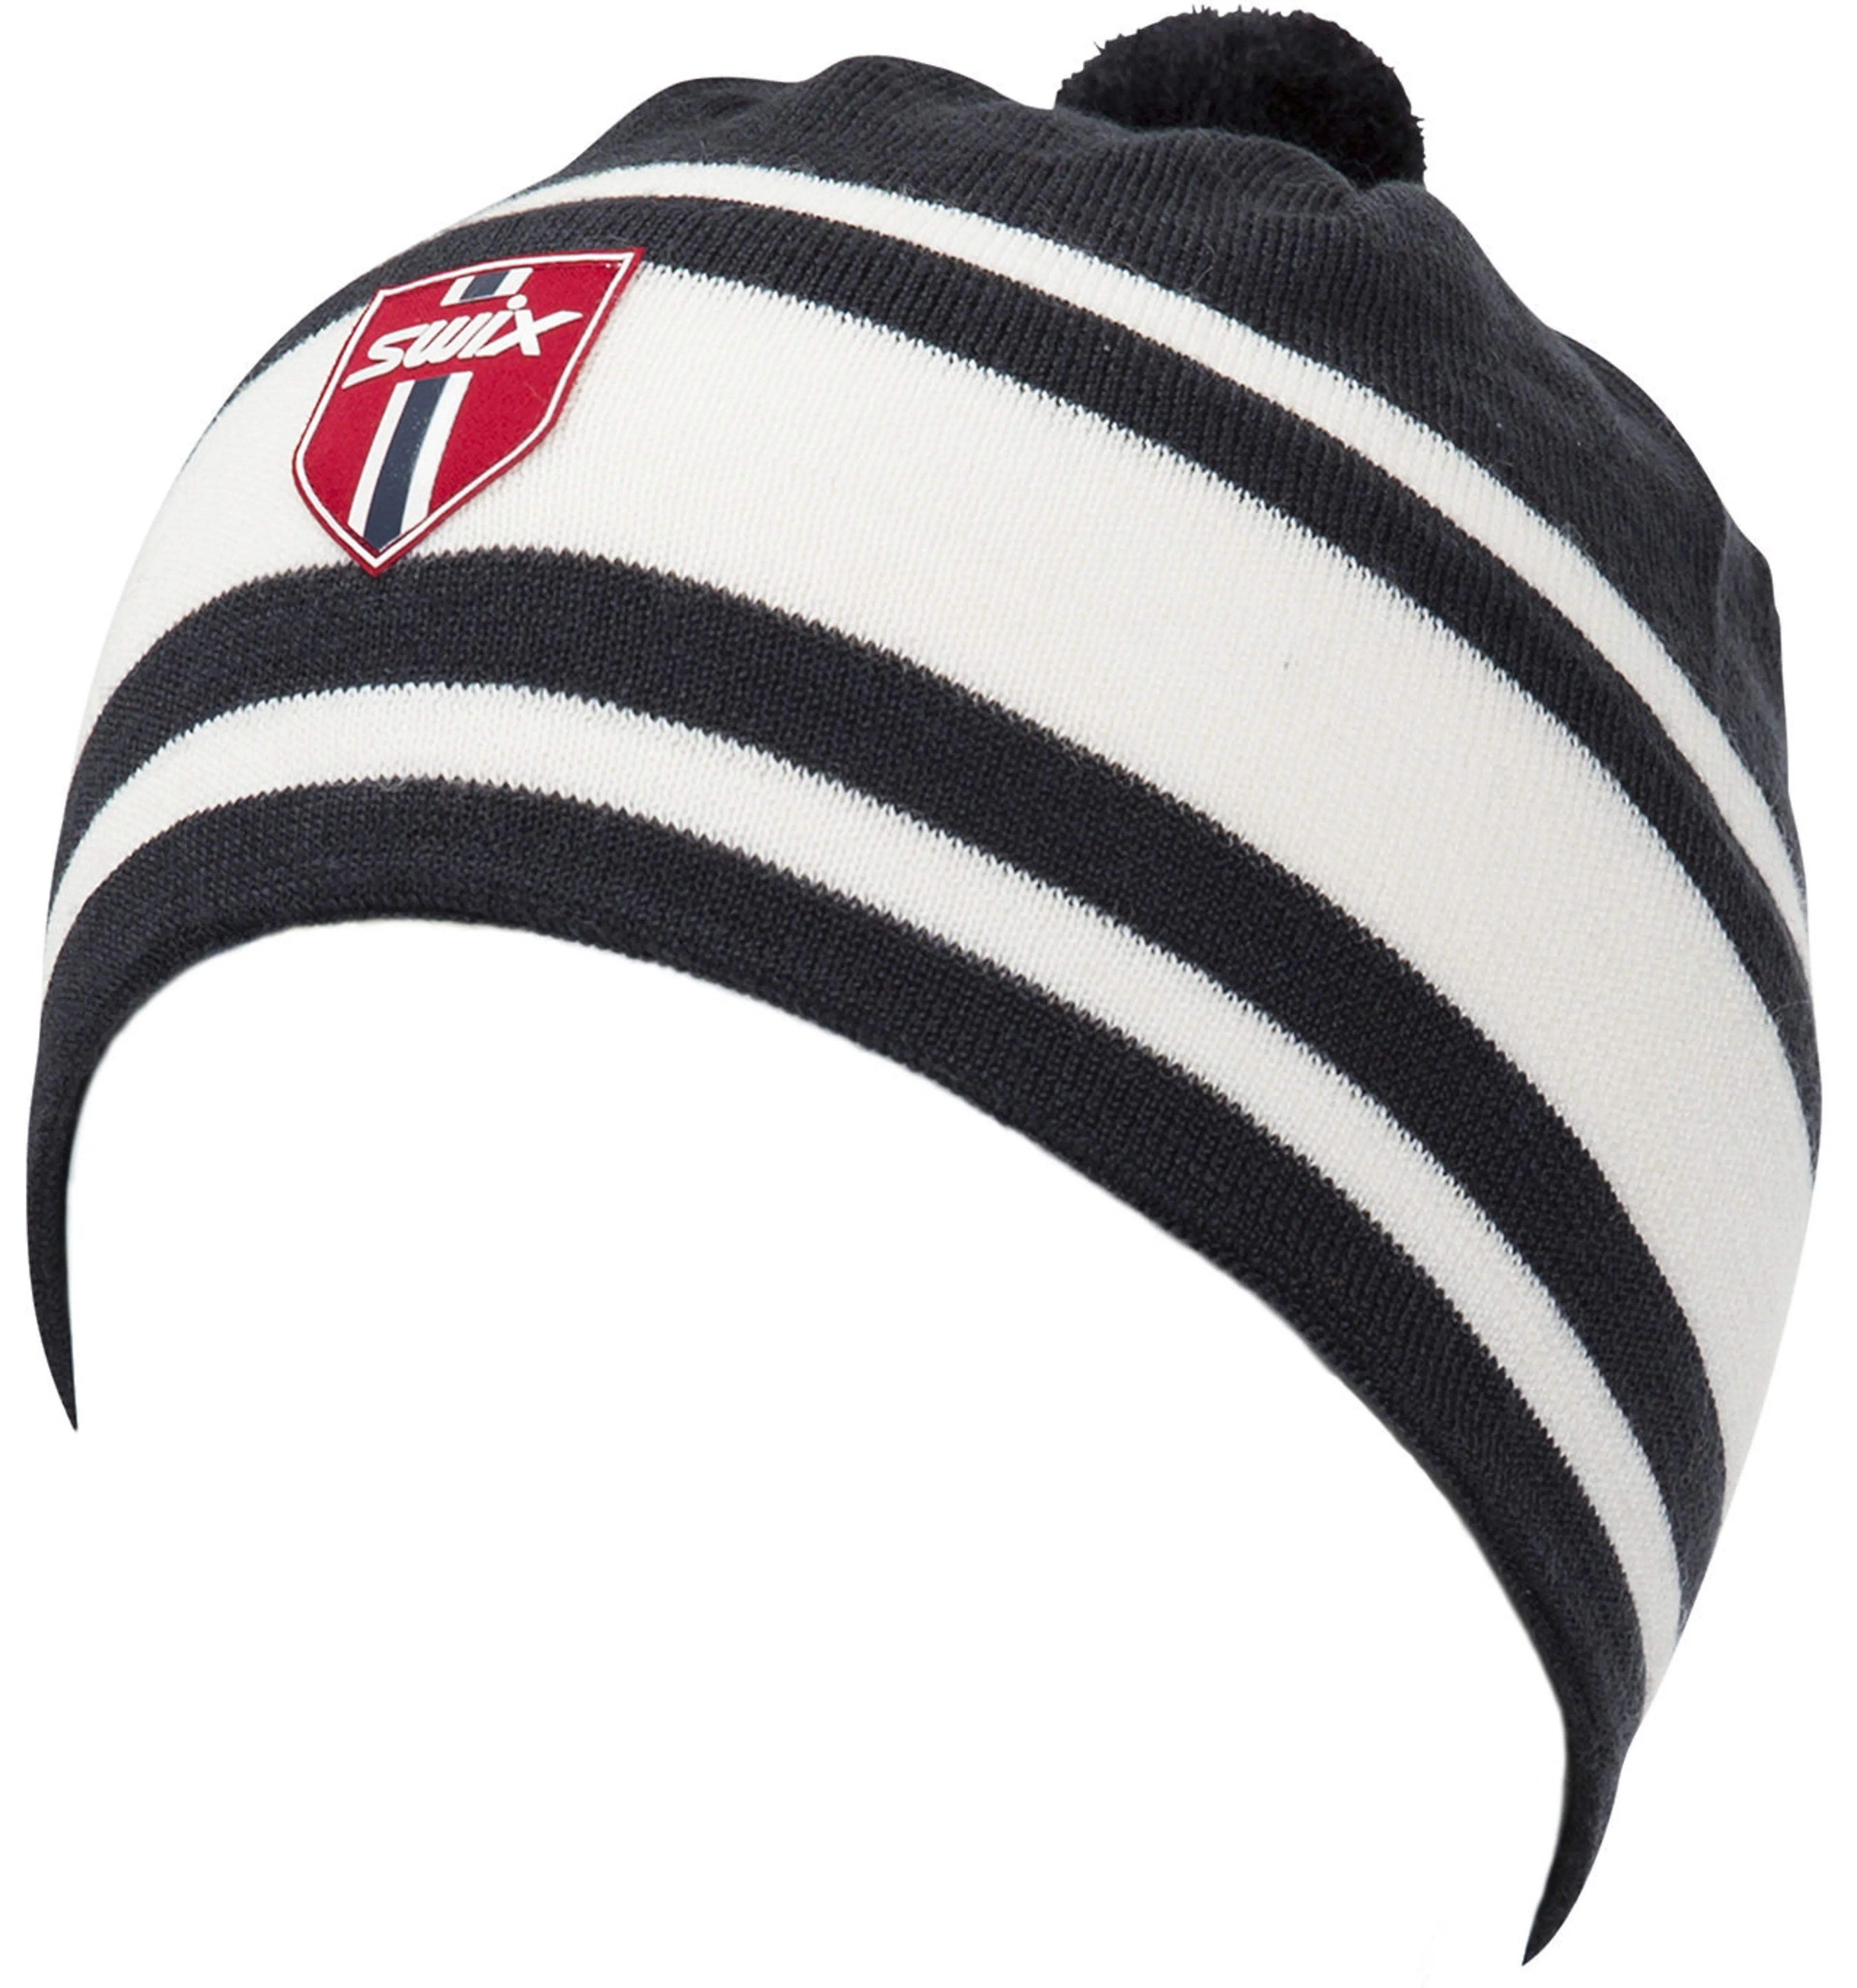 Tradition light beanie